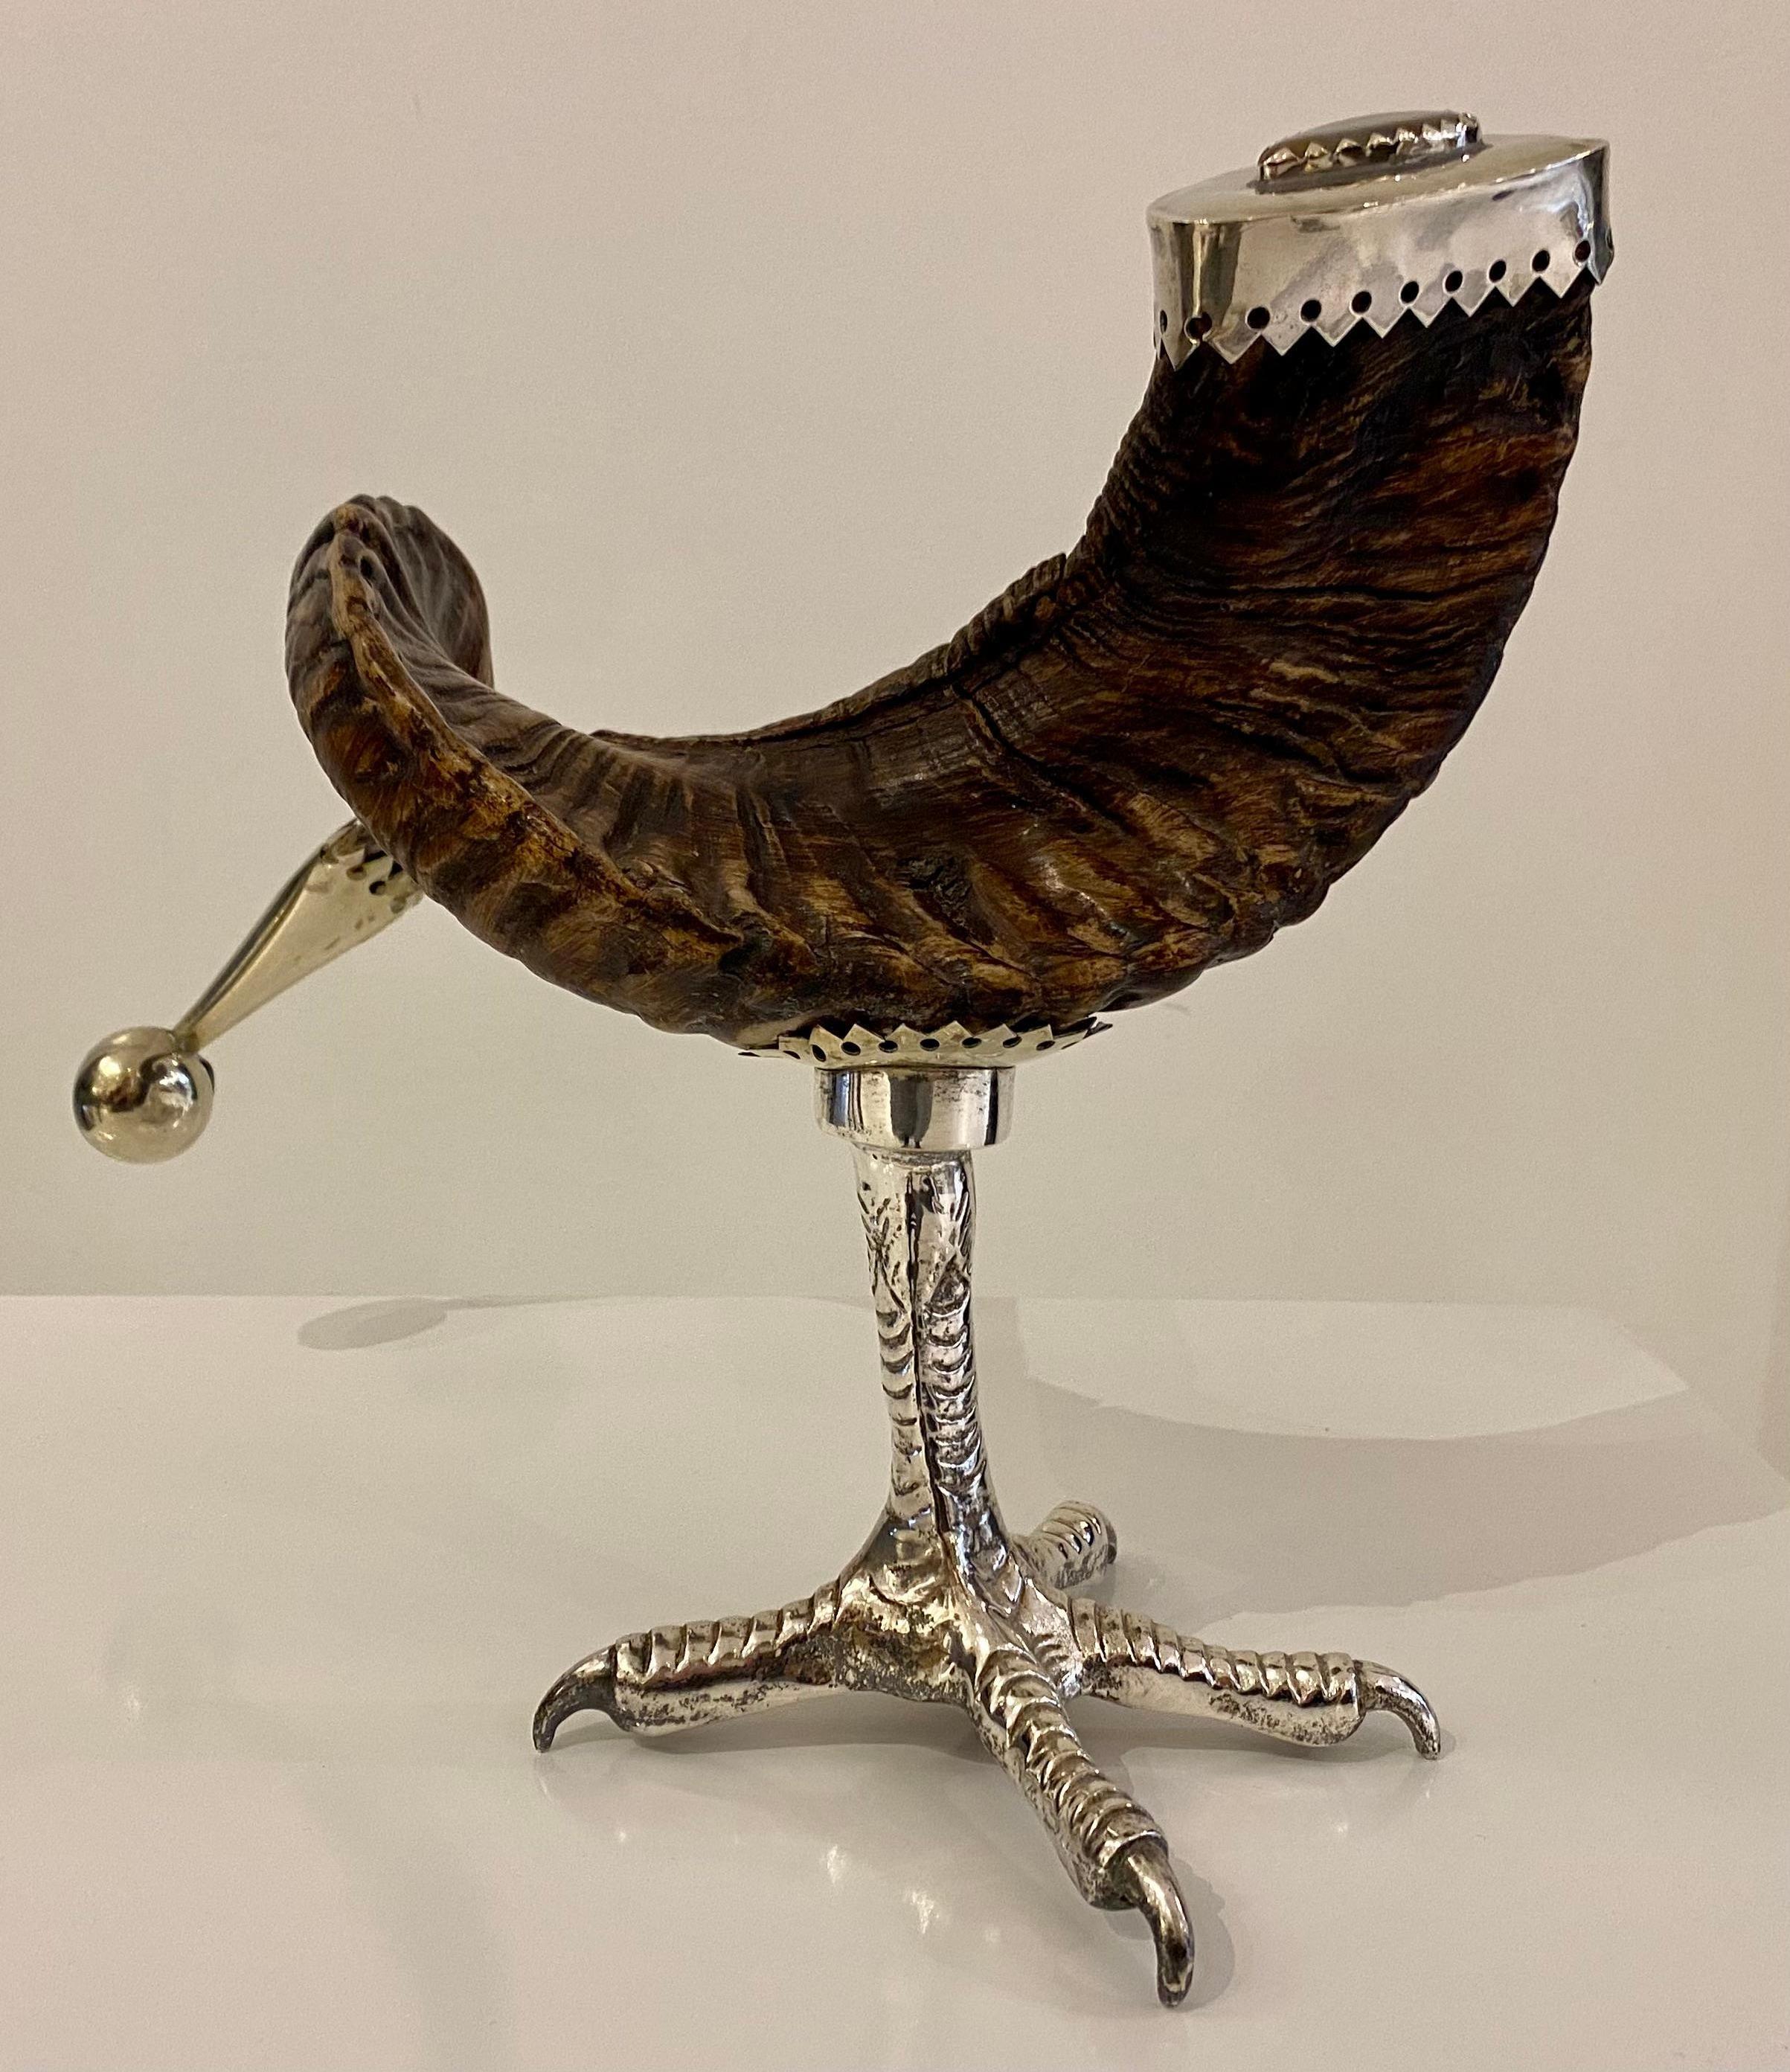 This is an impressive cast resin ram's horn sculpture by Anthony Redmile. A ram's horn serves as the primary element of this piece. A silver plated talon supports the sculpture. An ornate nickel fitting holds an agate specimen on the top of the